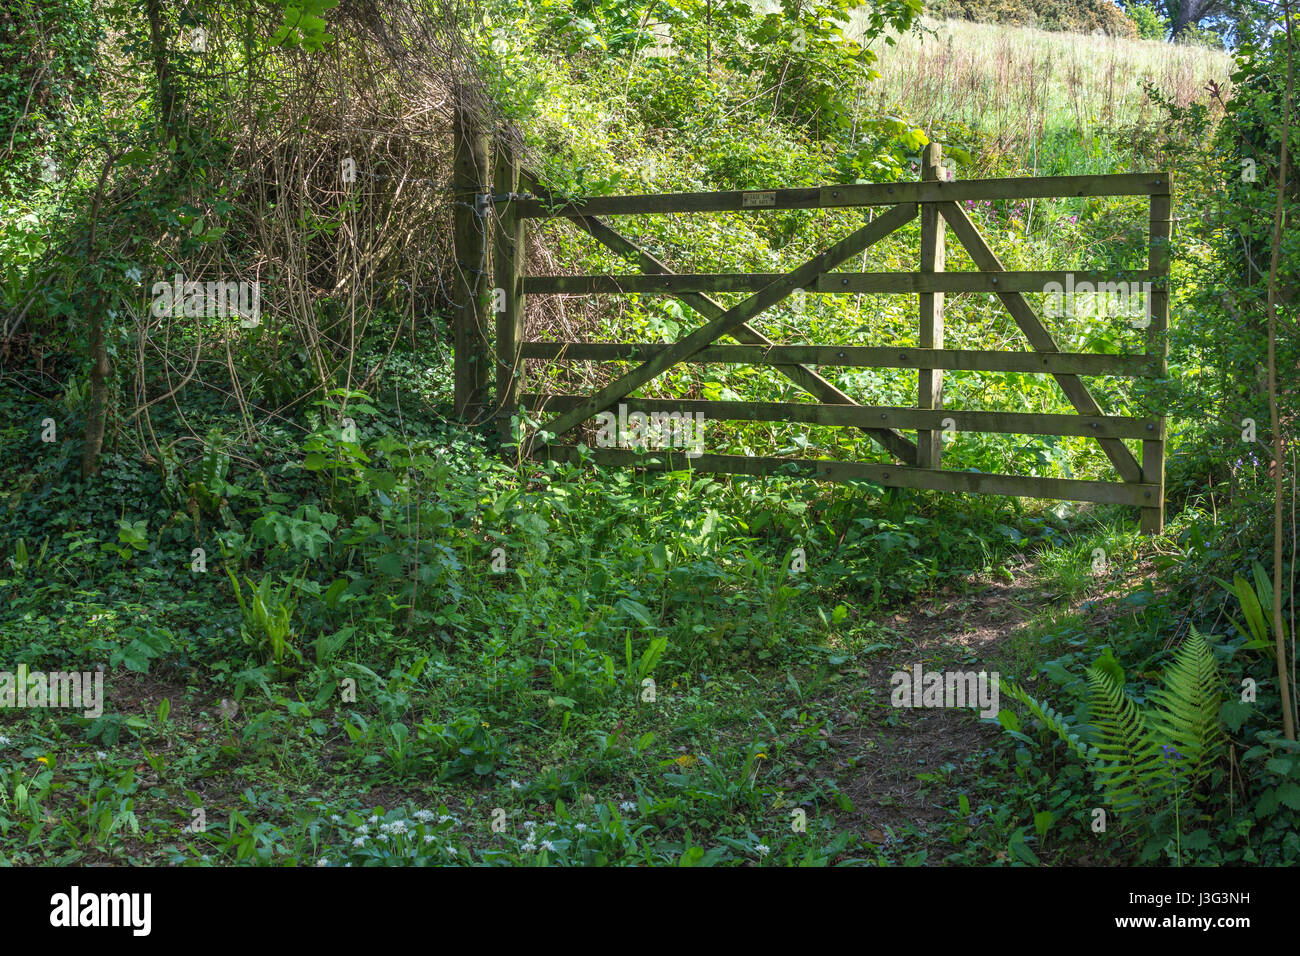 Closed wooden gate at entrance of an overgrown field / plot of land. Stock Photo